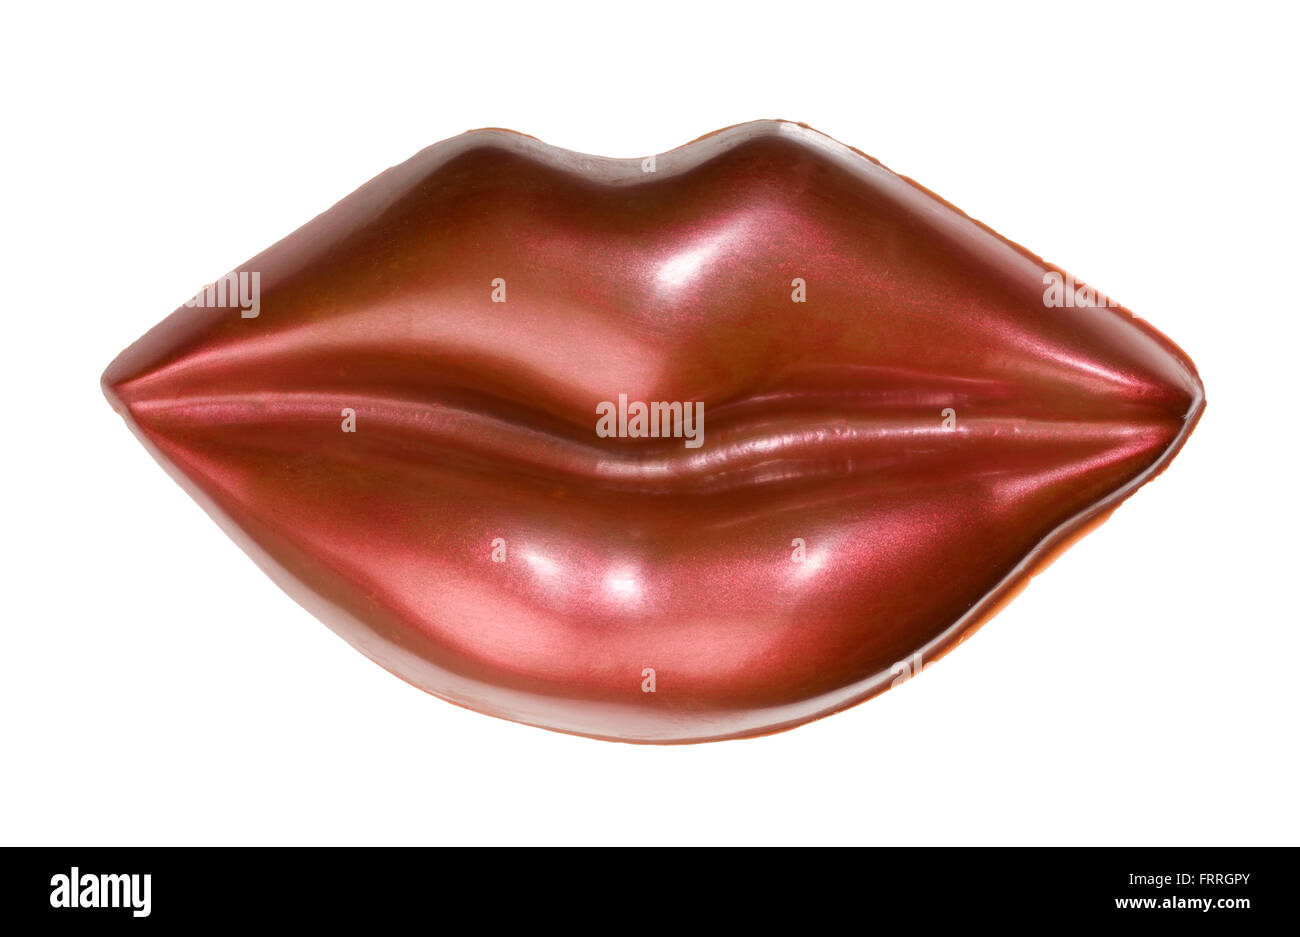 chocolate lips. Red shiny lips made from decorated milk chocolate. Moulded chocolate gift item. Stock Photo